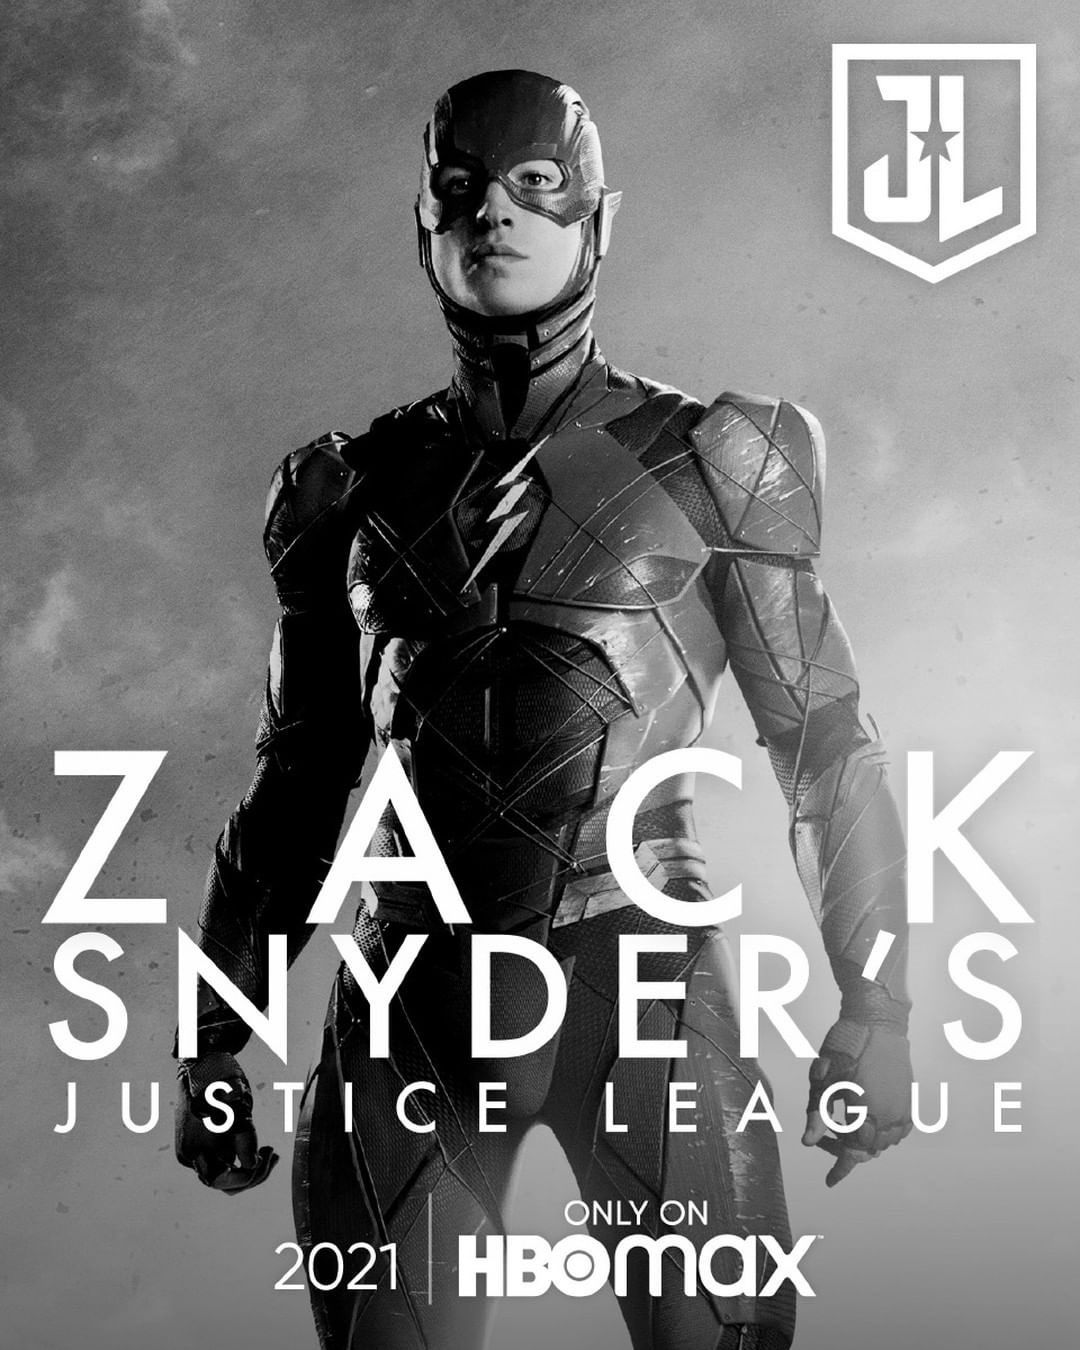 Zack Snyder's Justice League Poster Miller as The Flash League Movie चित्र - फैन्पॉप